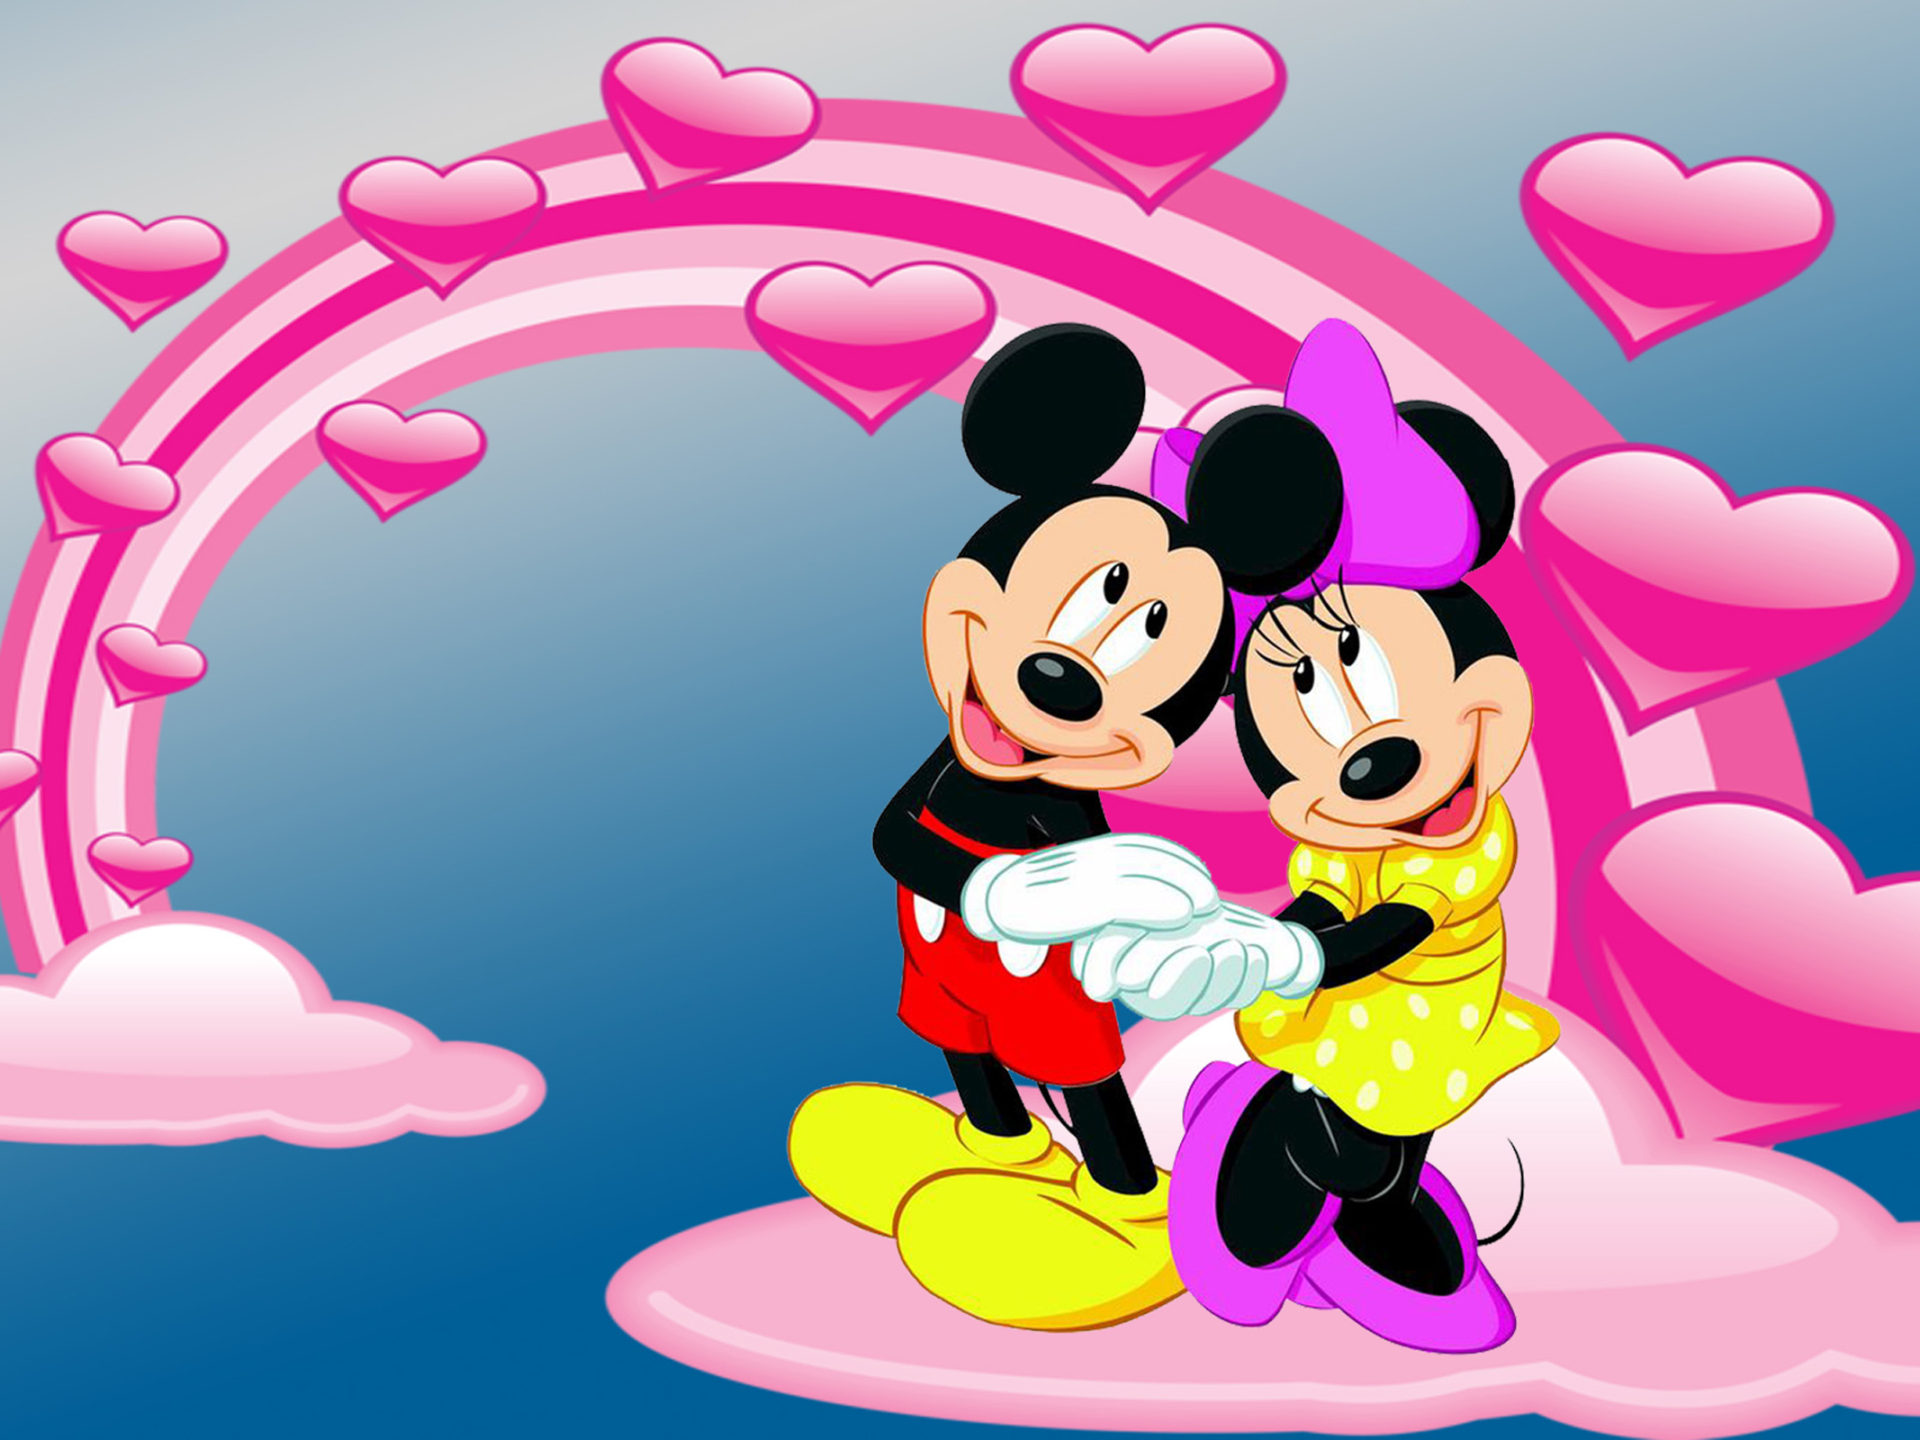 Mickey And Minnie Mouse Photo By Love Desktop HD Wallpaper For Pc Tablet And Mobile Download 2560x1600, Wallpaper13.com